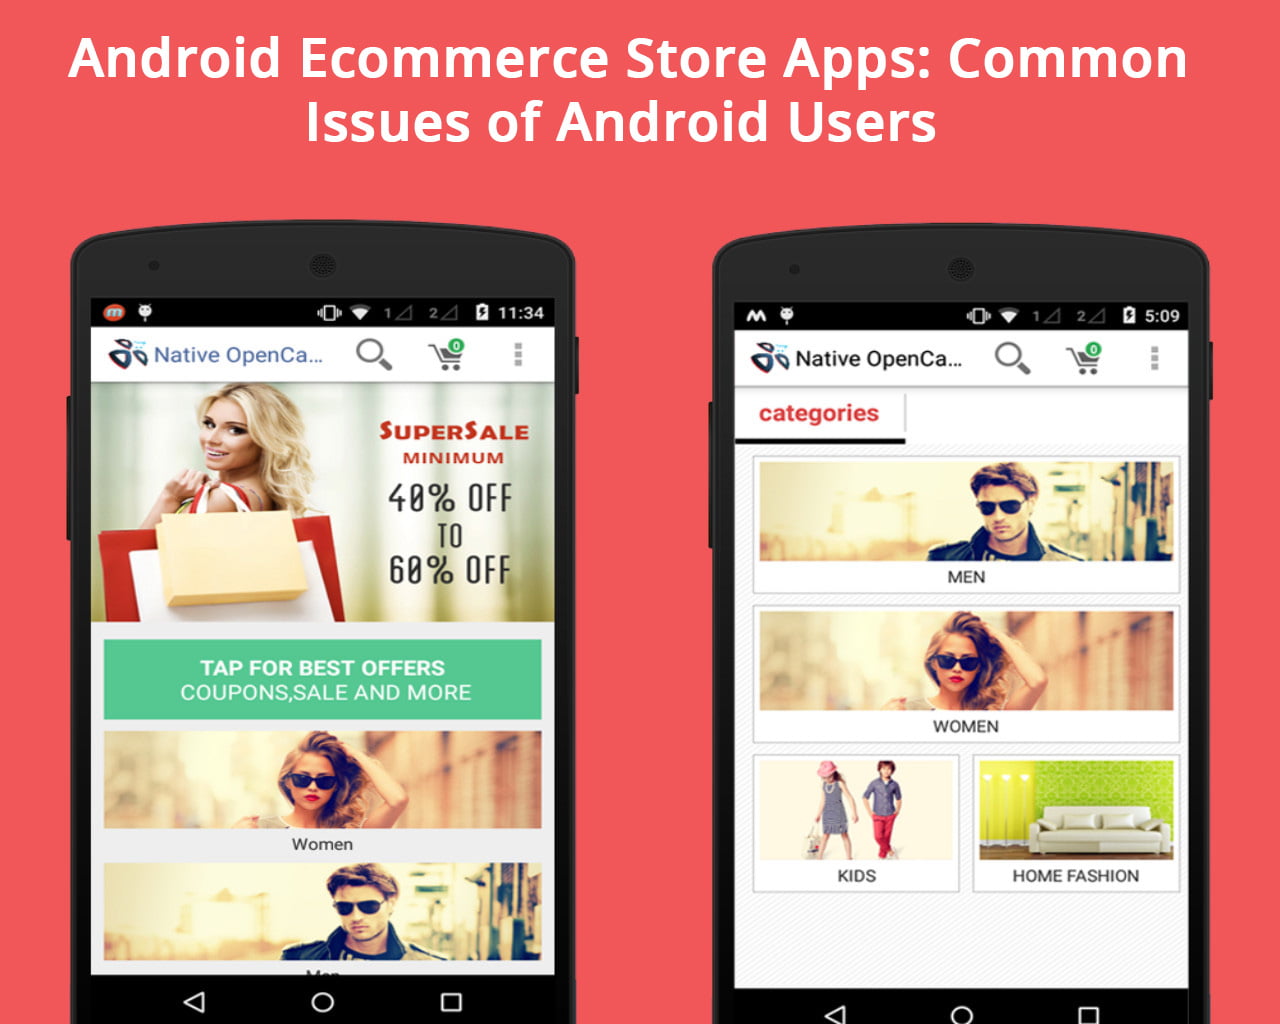 Android, Android Ecommerce App, Android Application, Ecommerce App Issues, Android Ecommerce App Issue